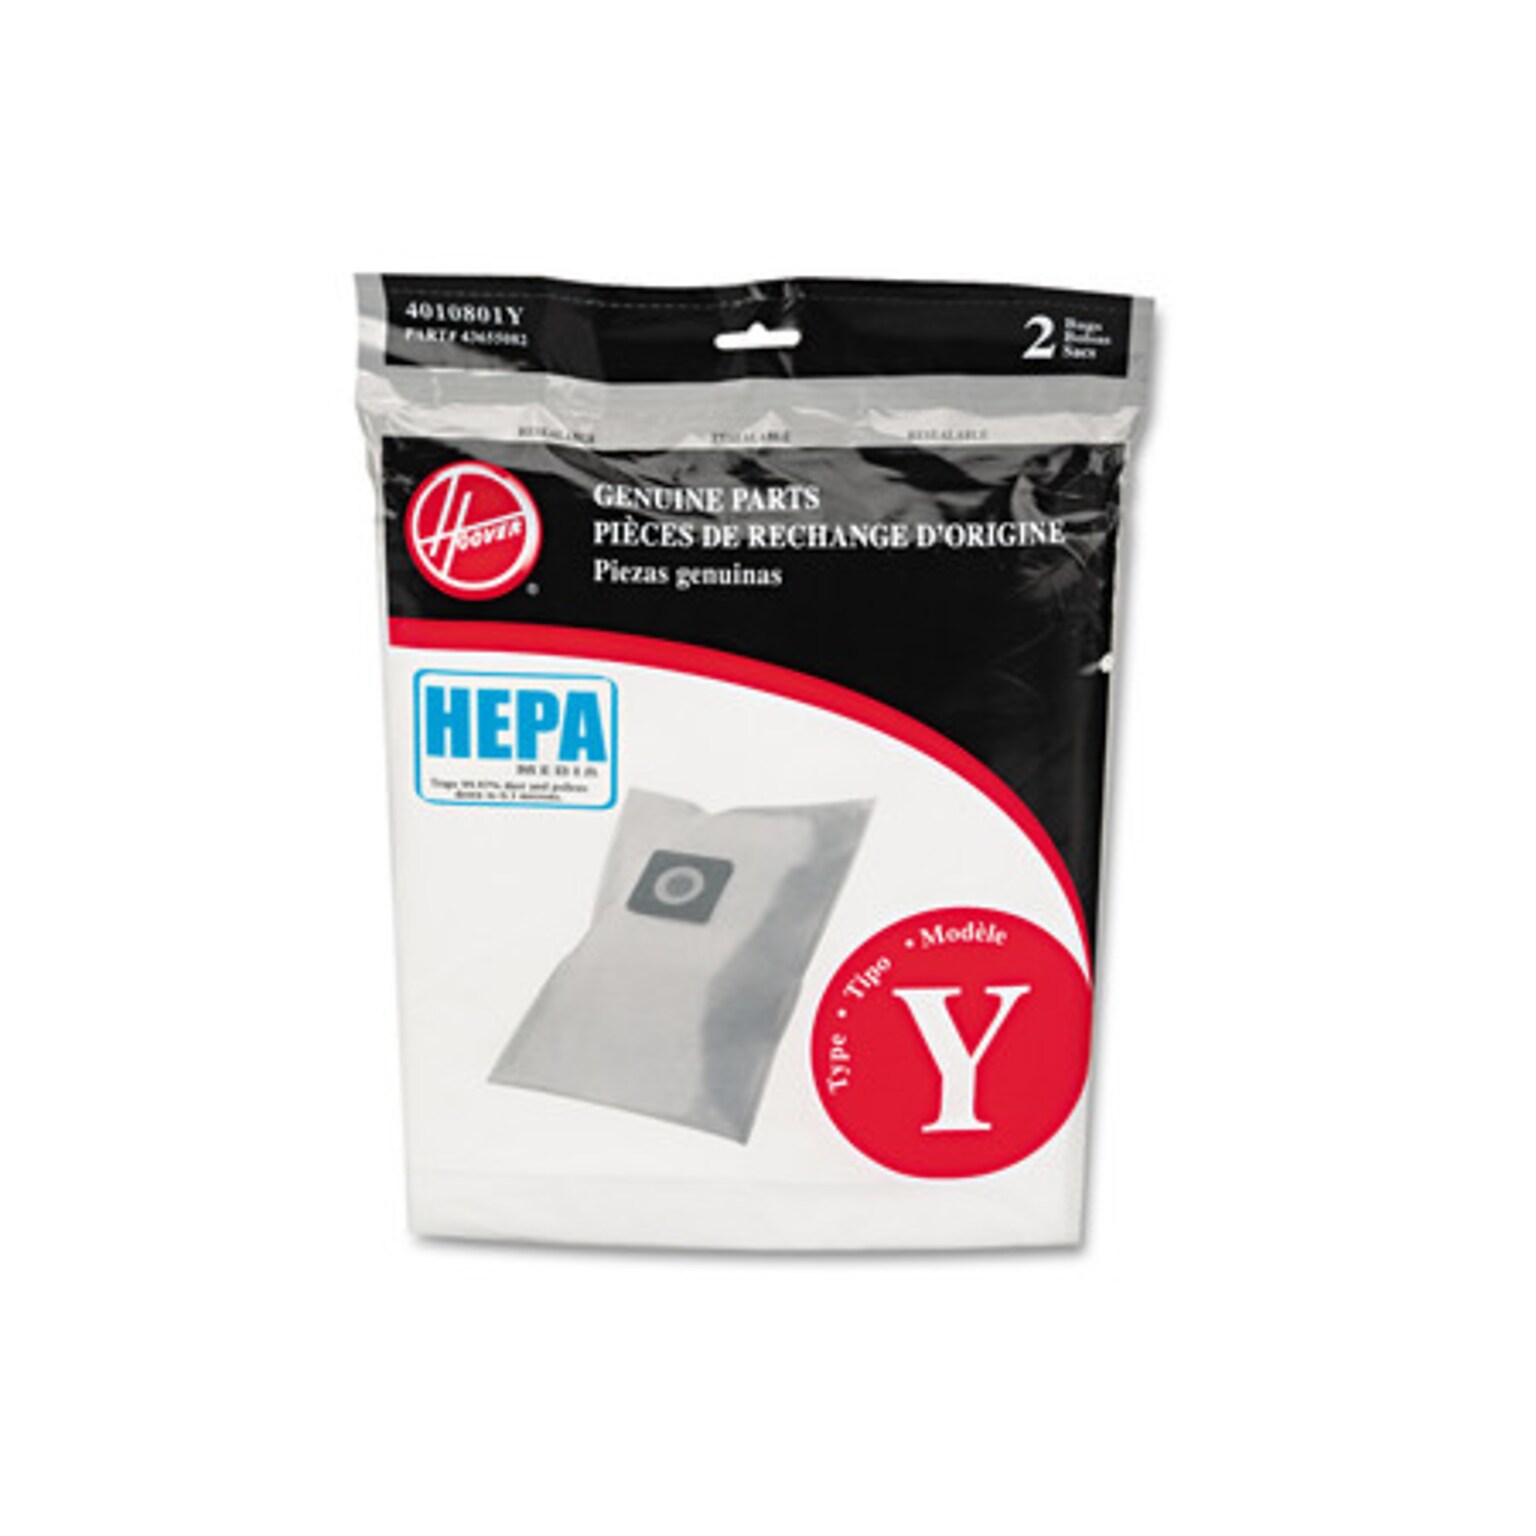 Hoover® Vacuum Replacement Bags, TYPE Y Disposable HEPA Bags for Hoover® Windtunnel Vacuums, 2/Pack (AH10040)